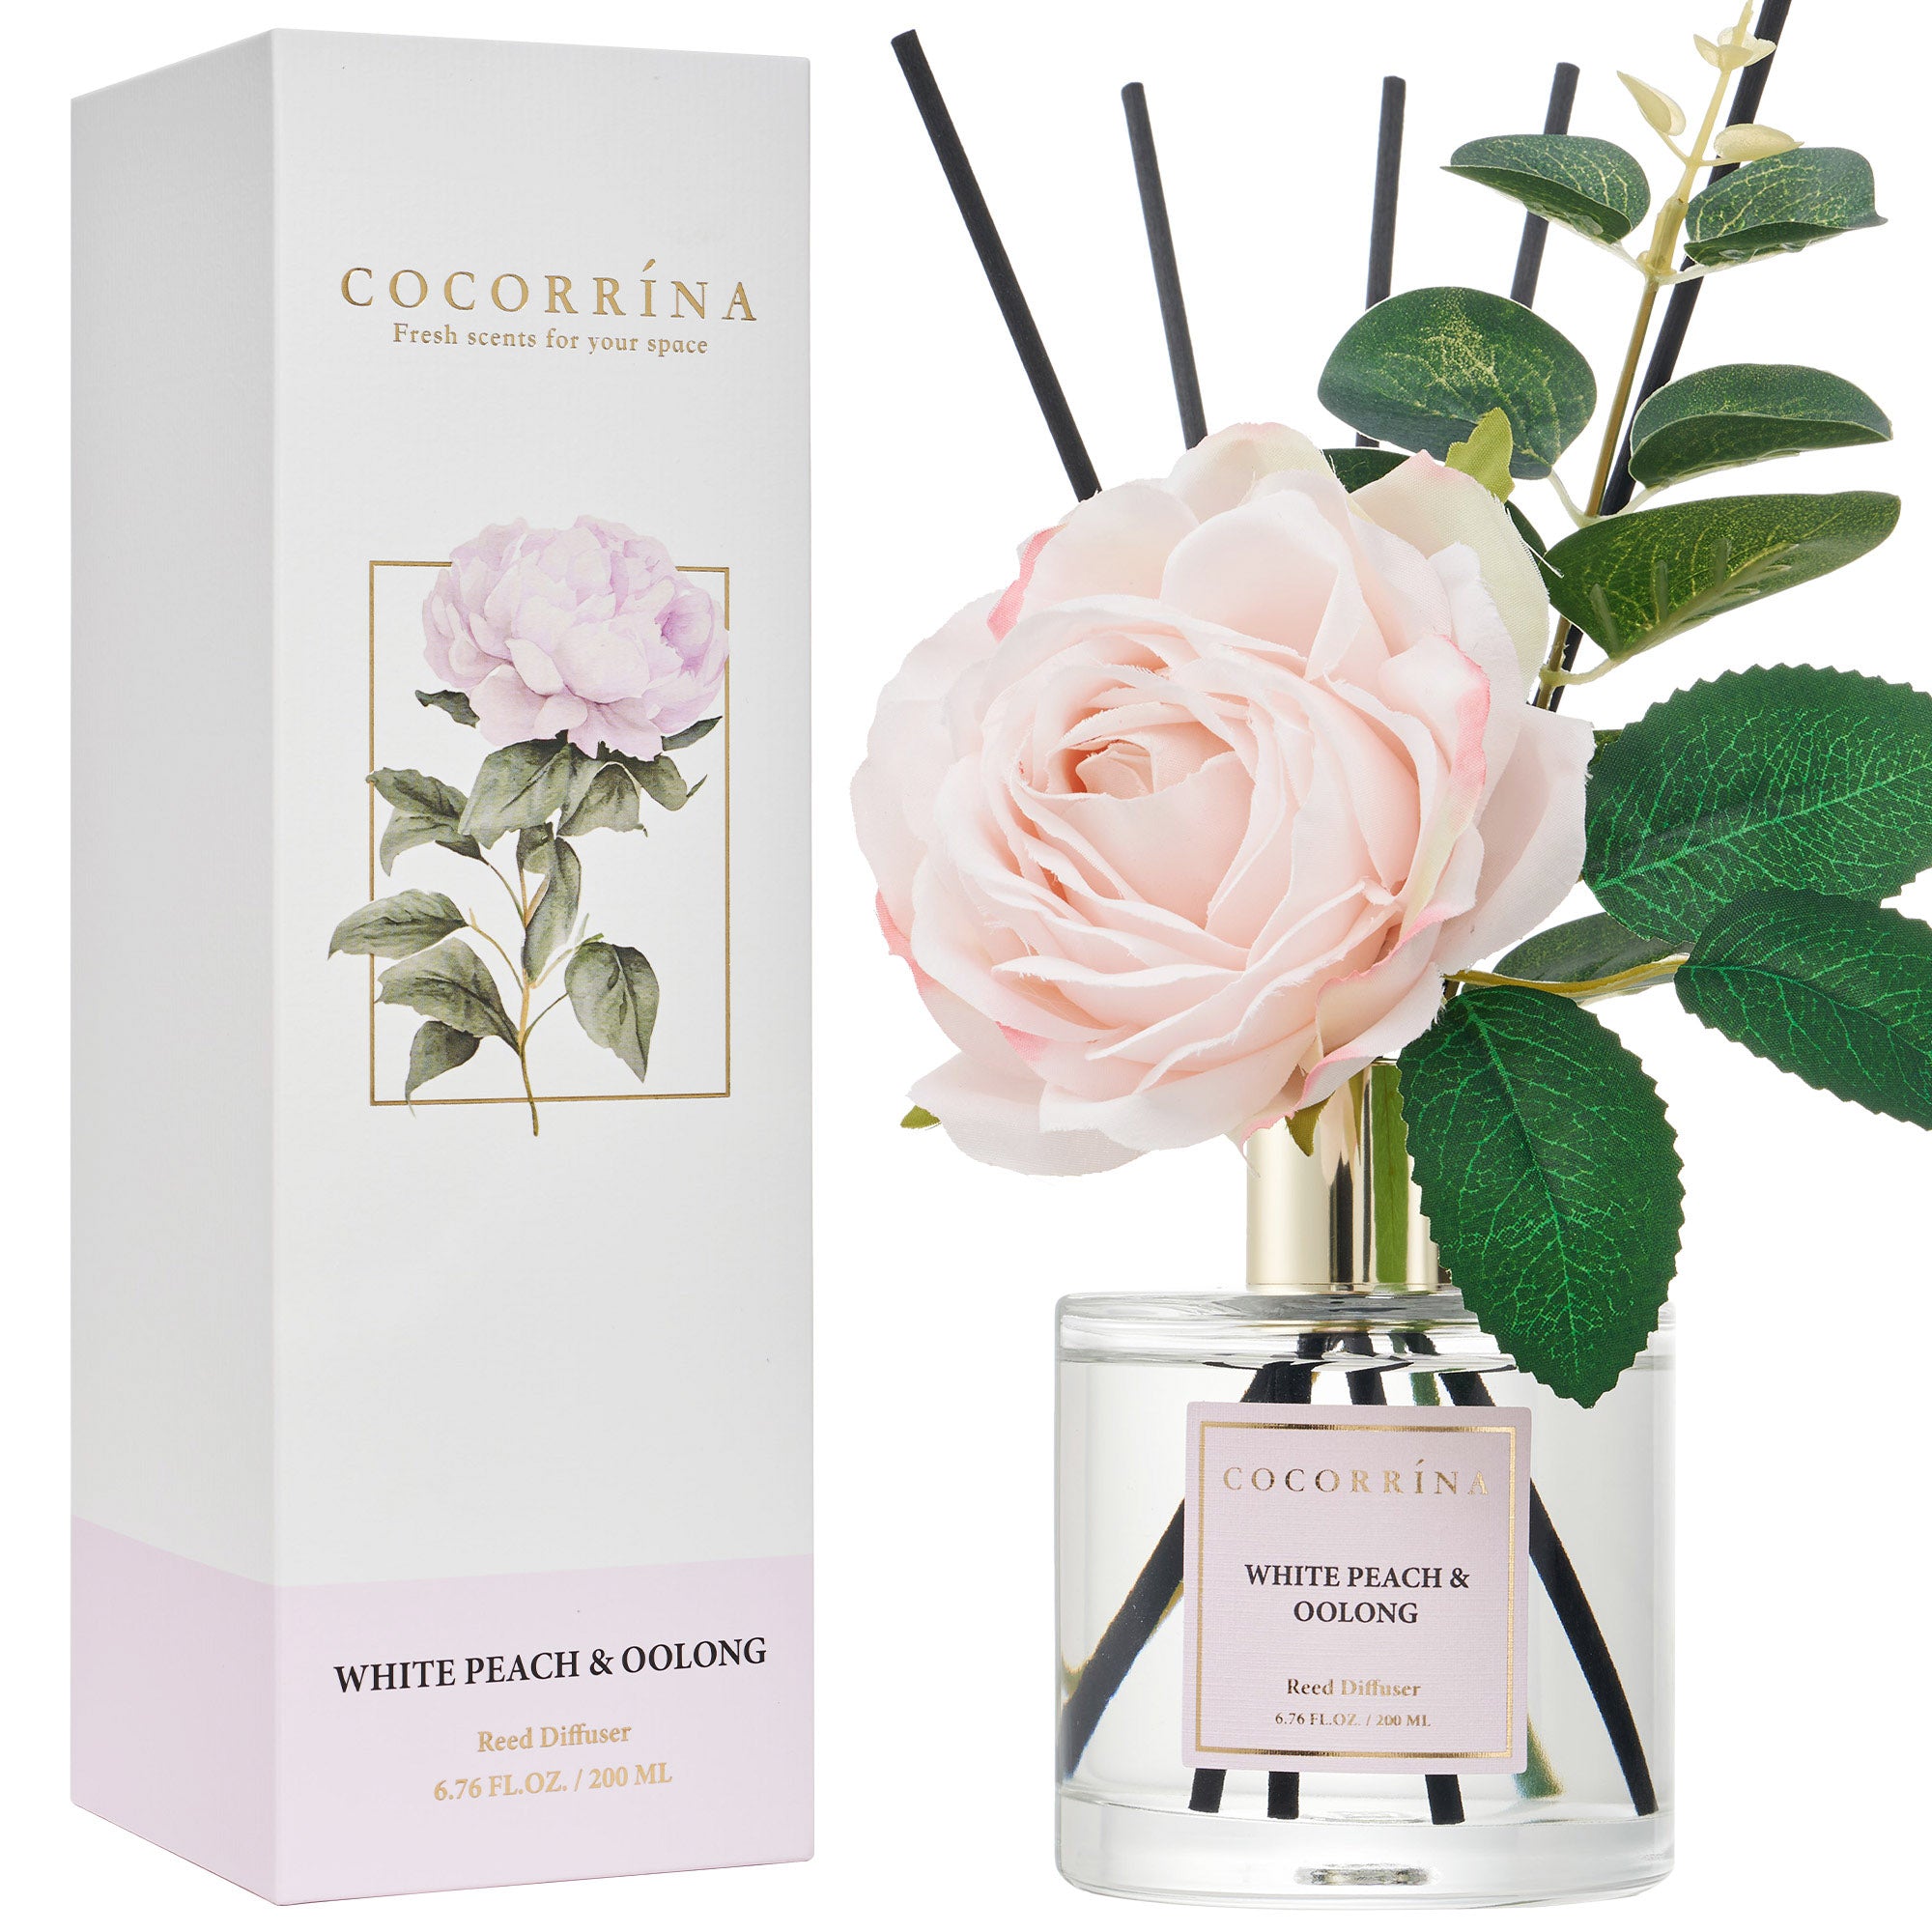 COCORRÍNA White Peach& Oolong Flower Reed Diffuser